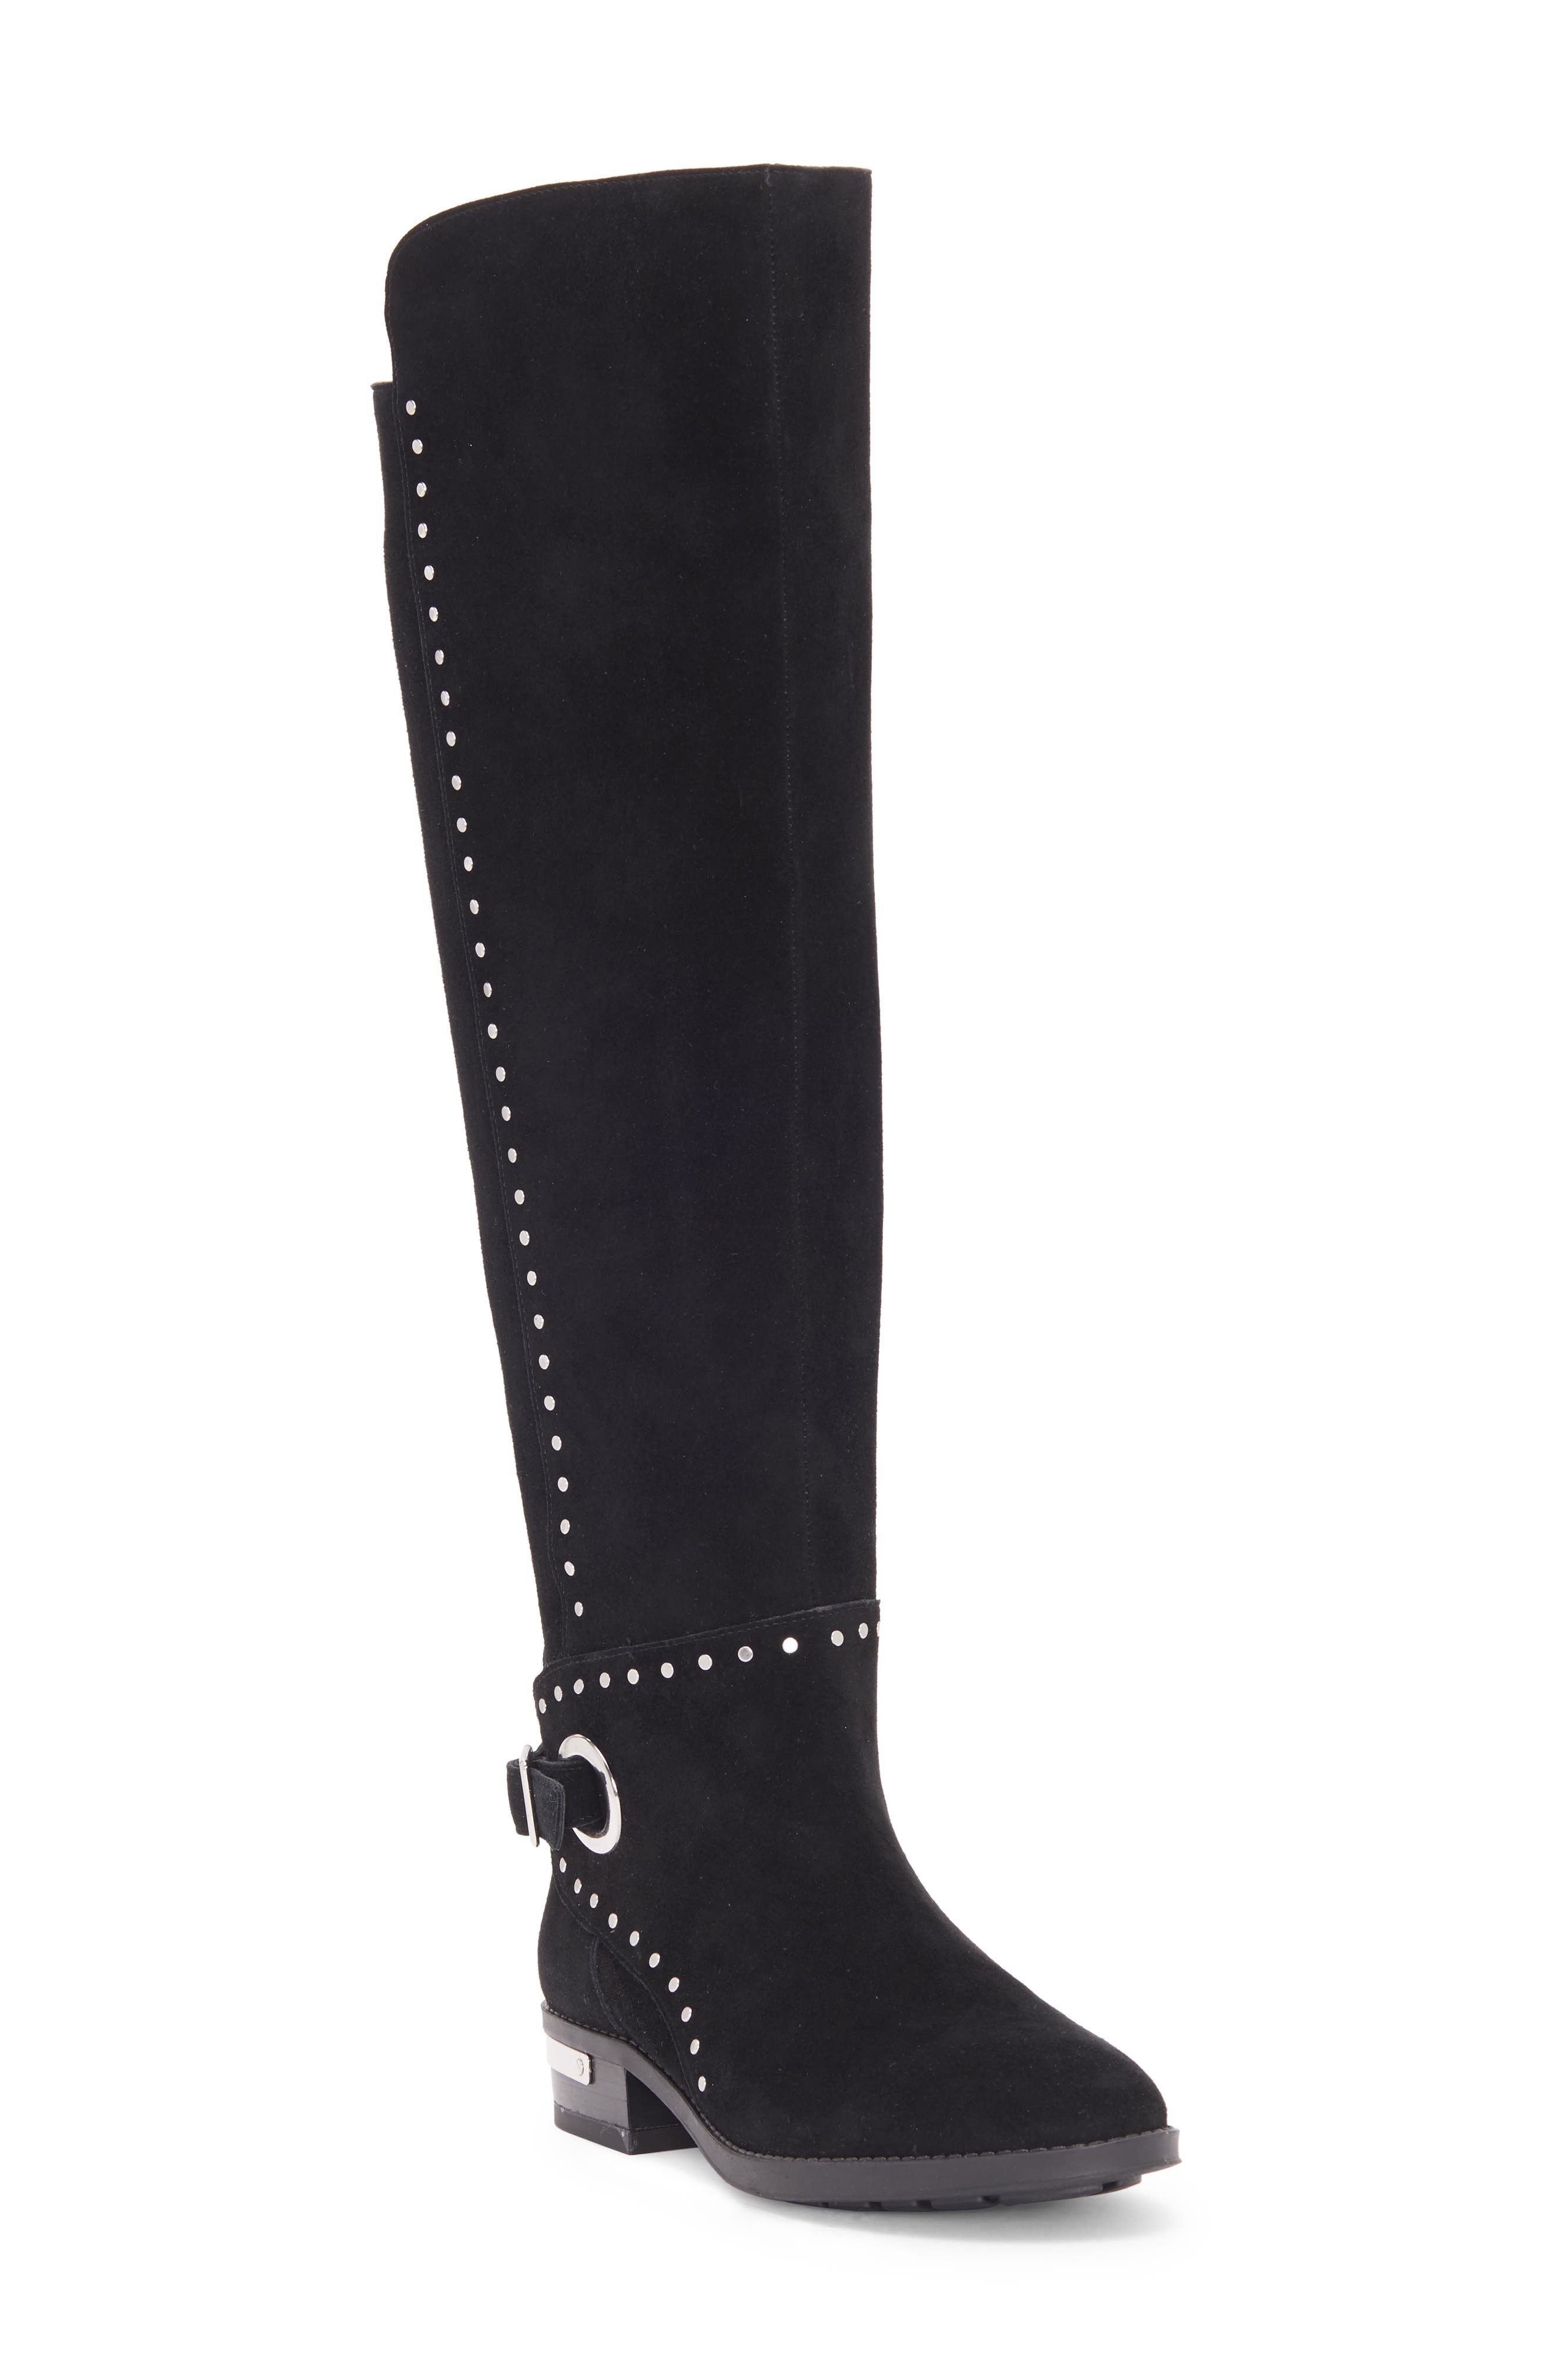 vince camuto black riding boots